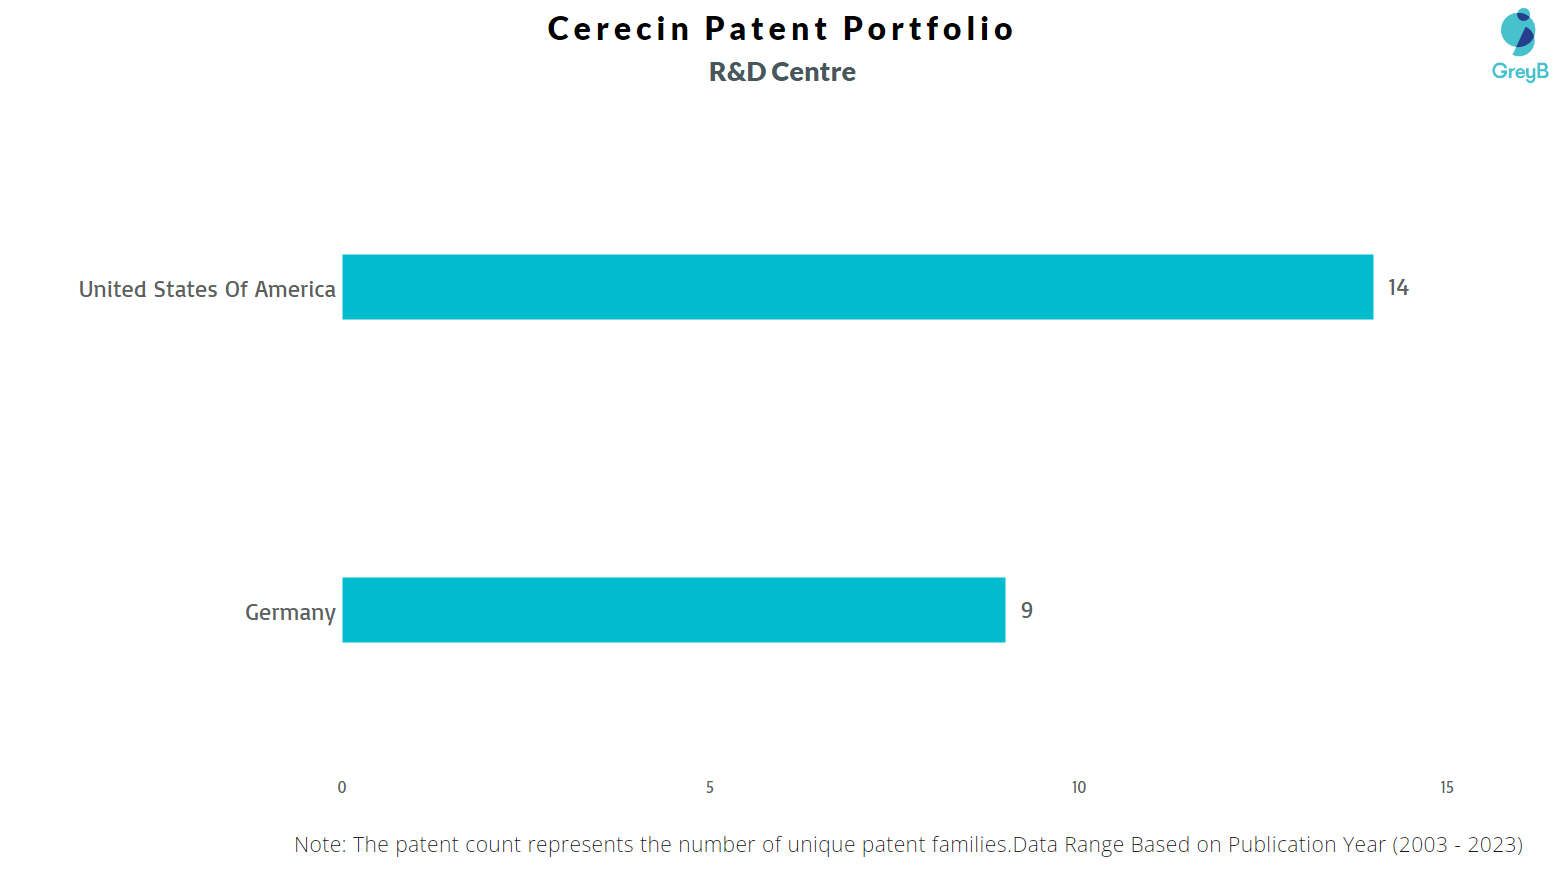 Research Centers of Cerecin Patents